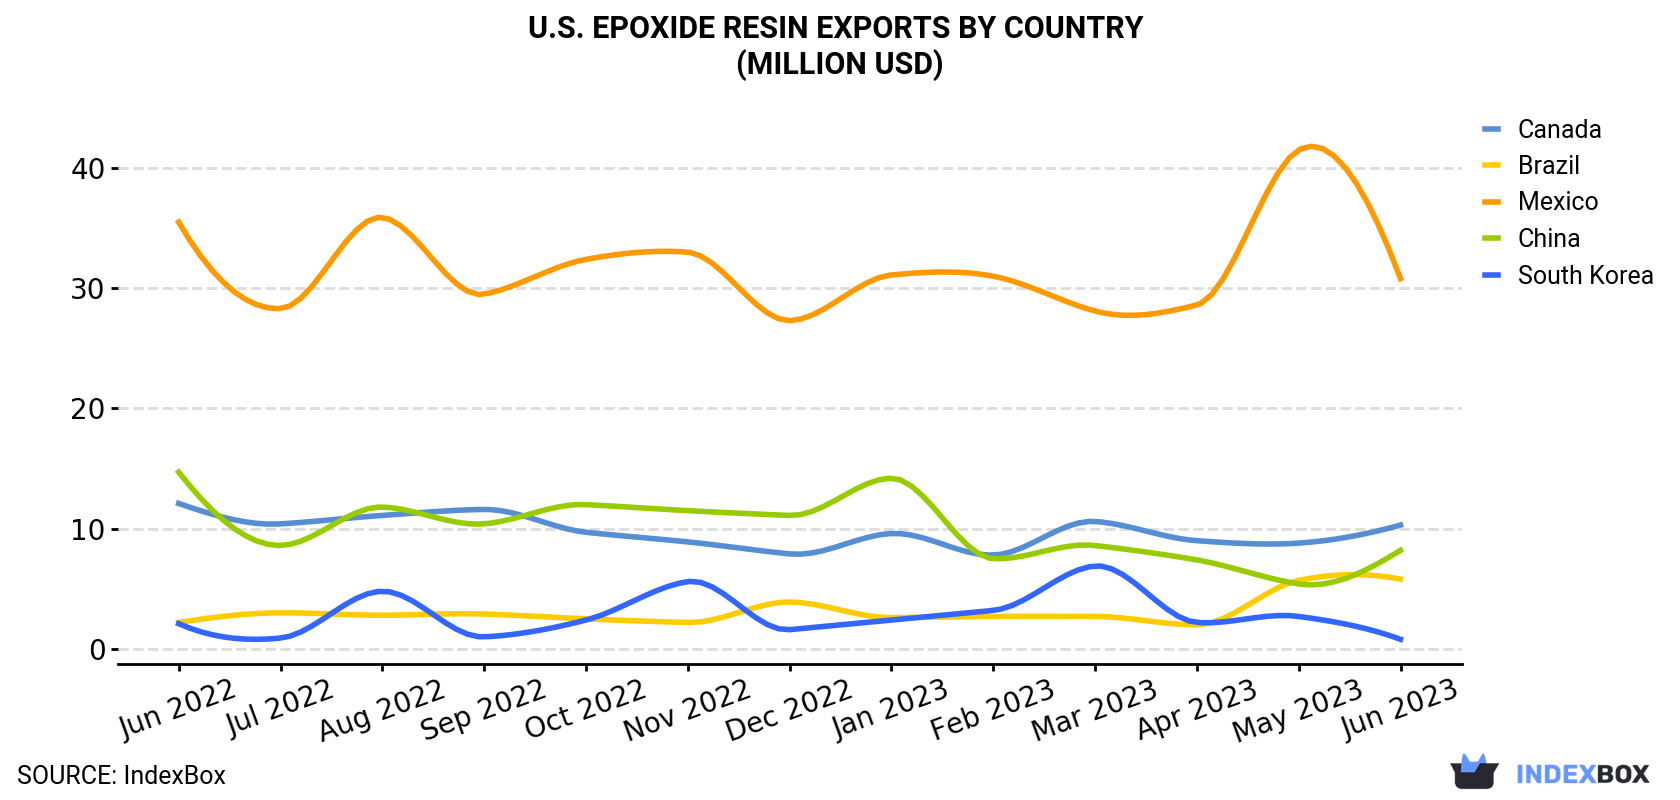 U.S. Epoxide Resin Exports By Country (Million USD)